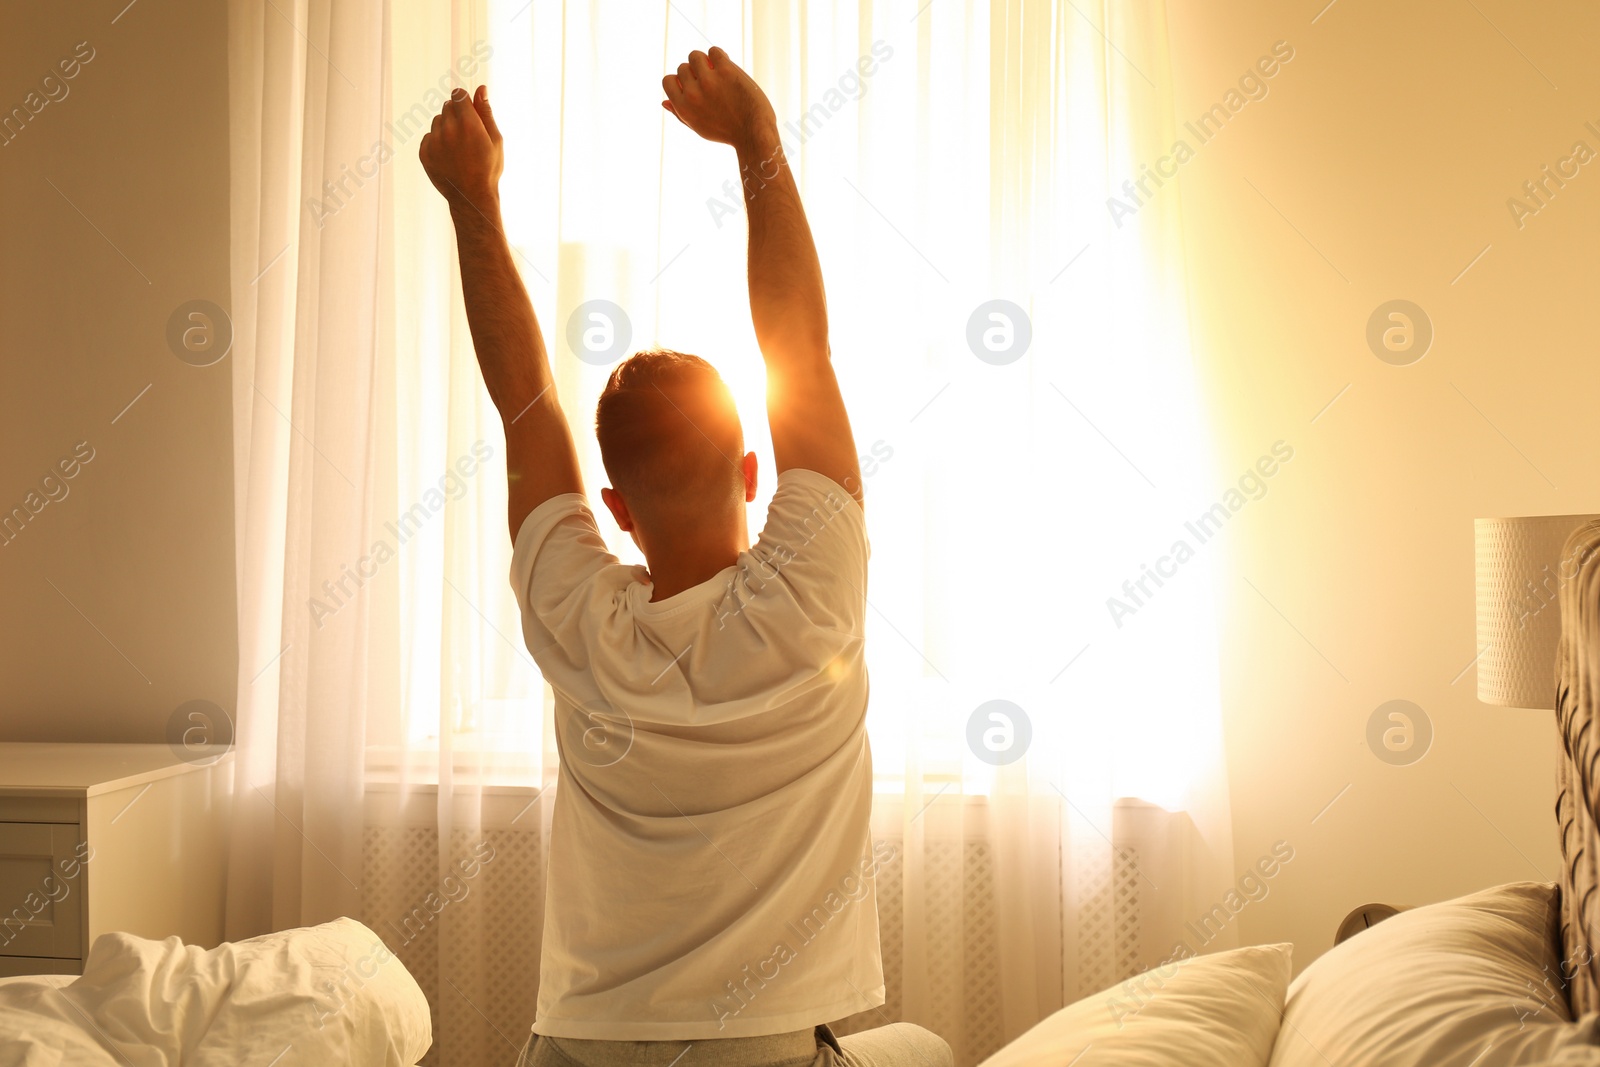 Photo of Young man stretching on bed at home, view from back. Lazy morning